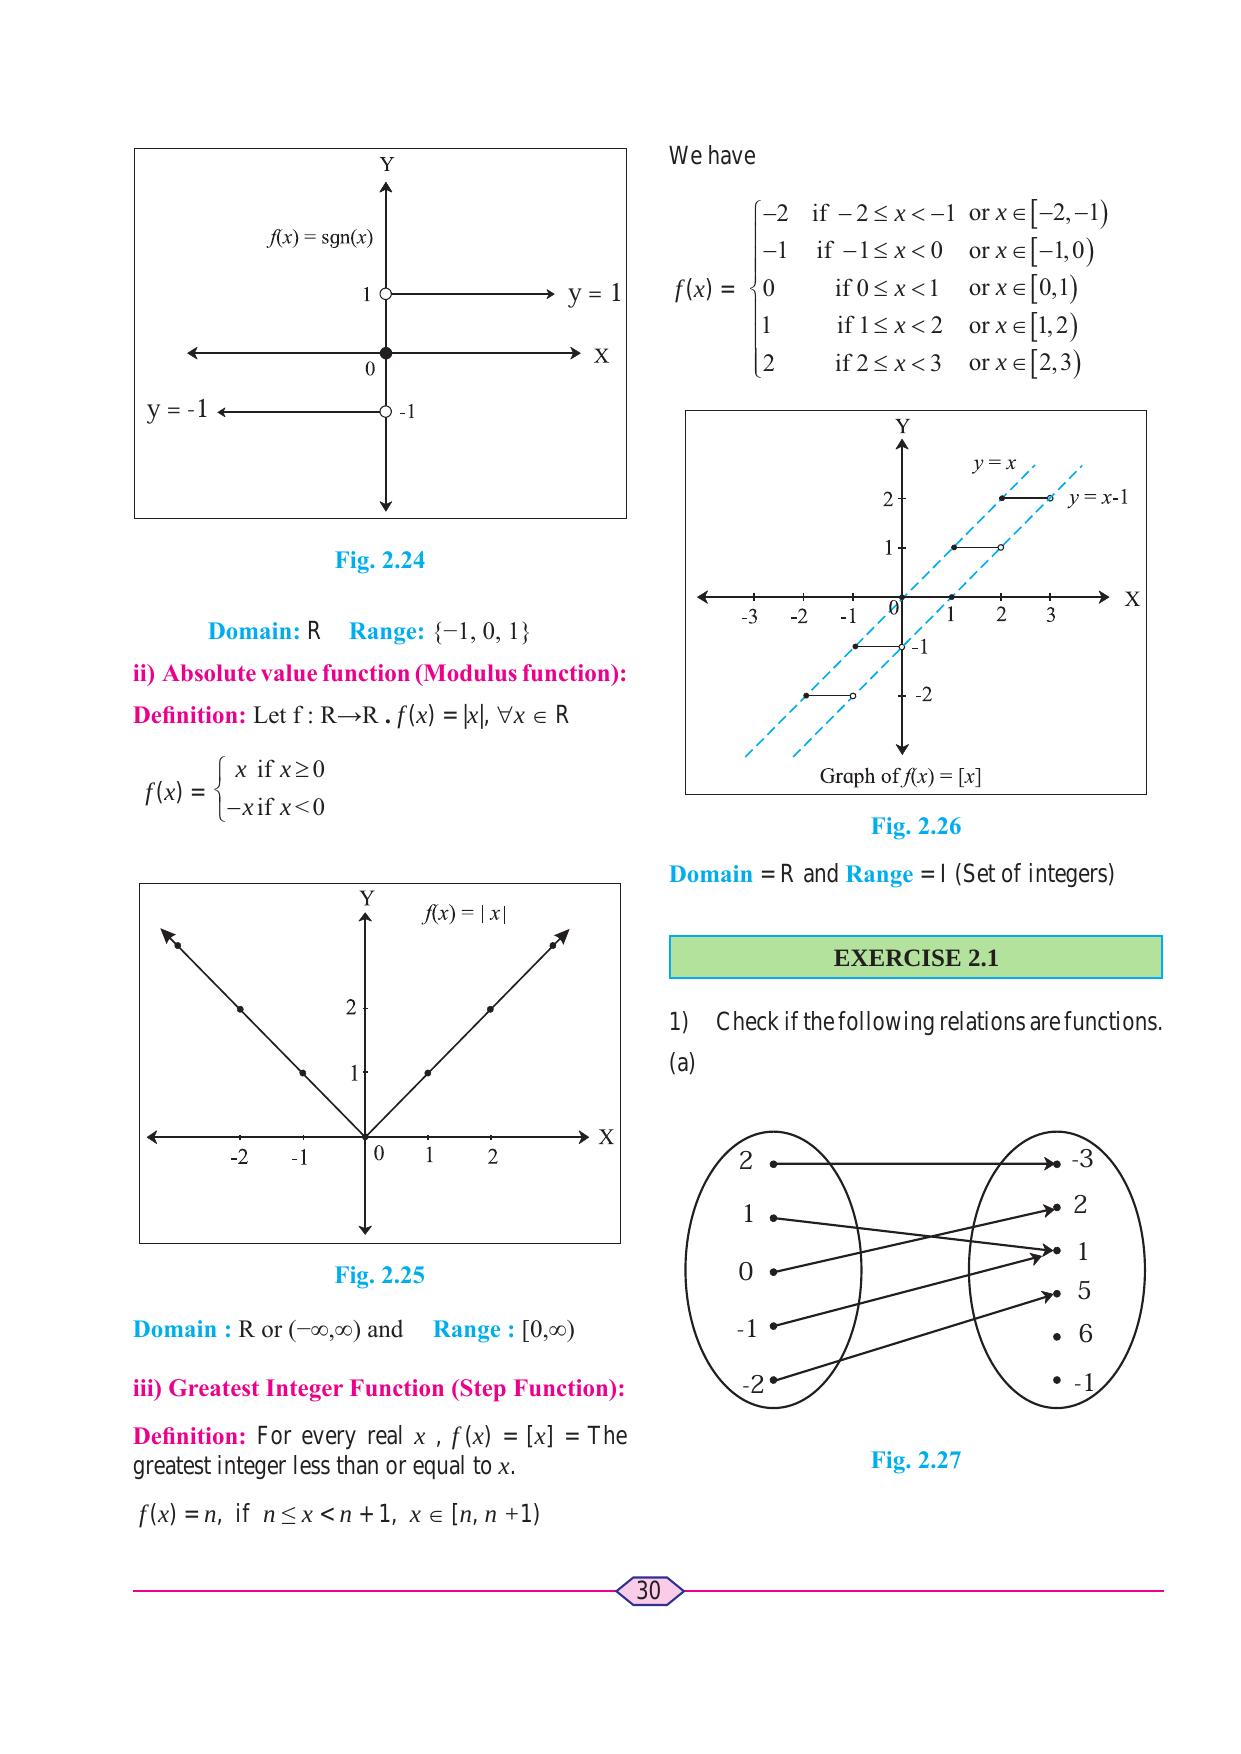 Maharashtra Board Class 11 Maths (Commerce) (Part 1) Textbook - Page 40